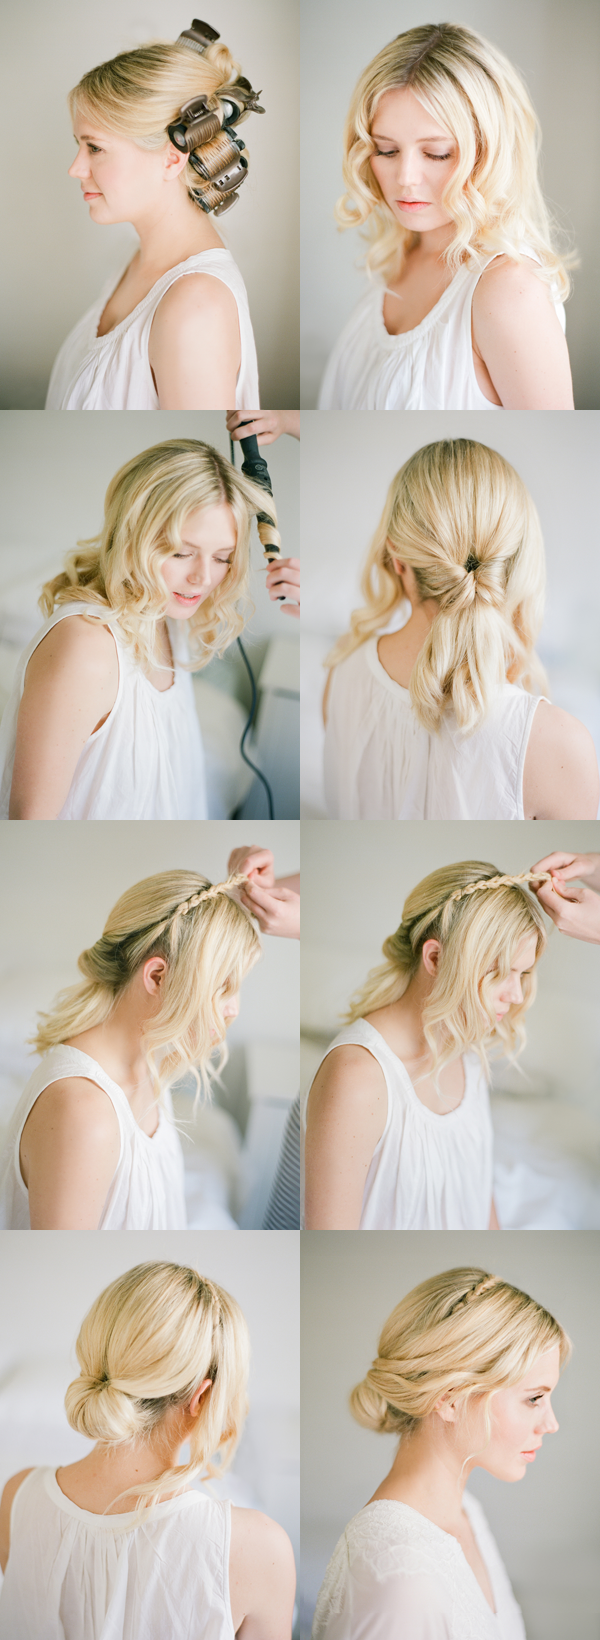 hairstyles (3)